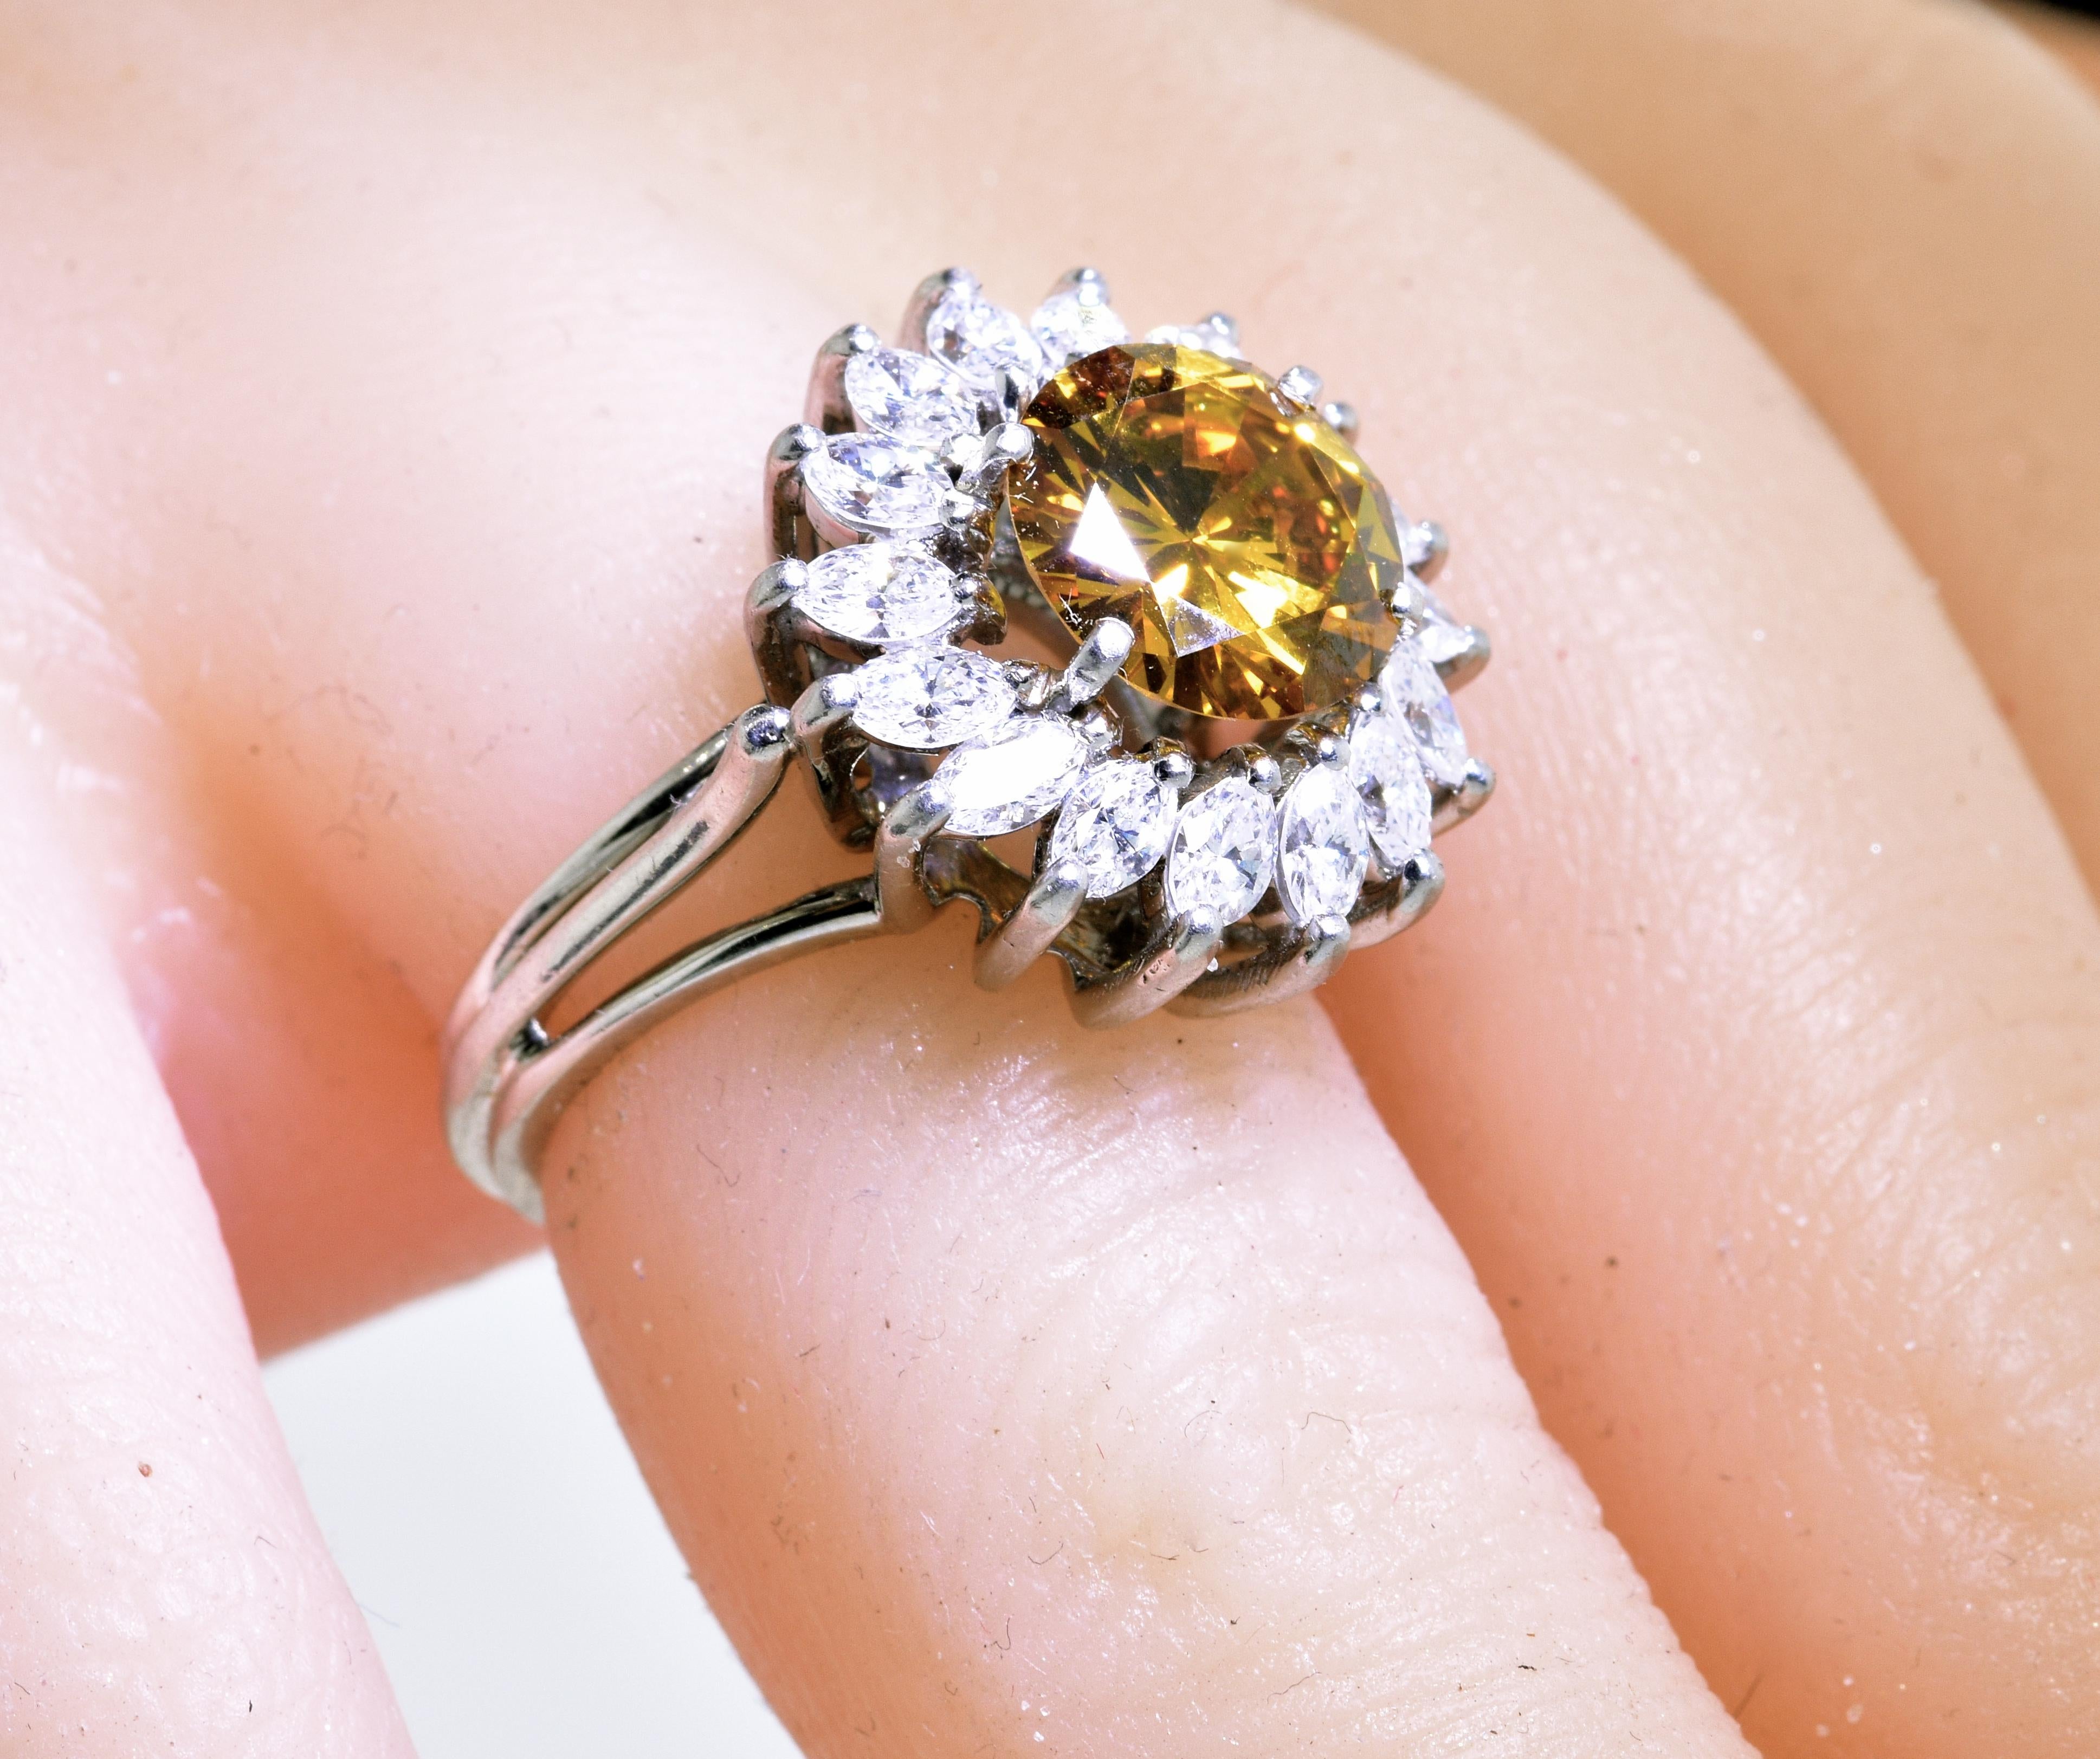 Contemporary Fancy Cognac Diamond, 2.68 Carat Surrounded by White Diamond in a Platinum Ring